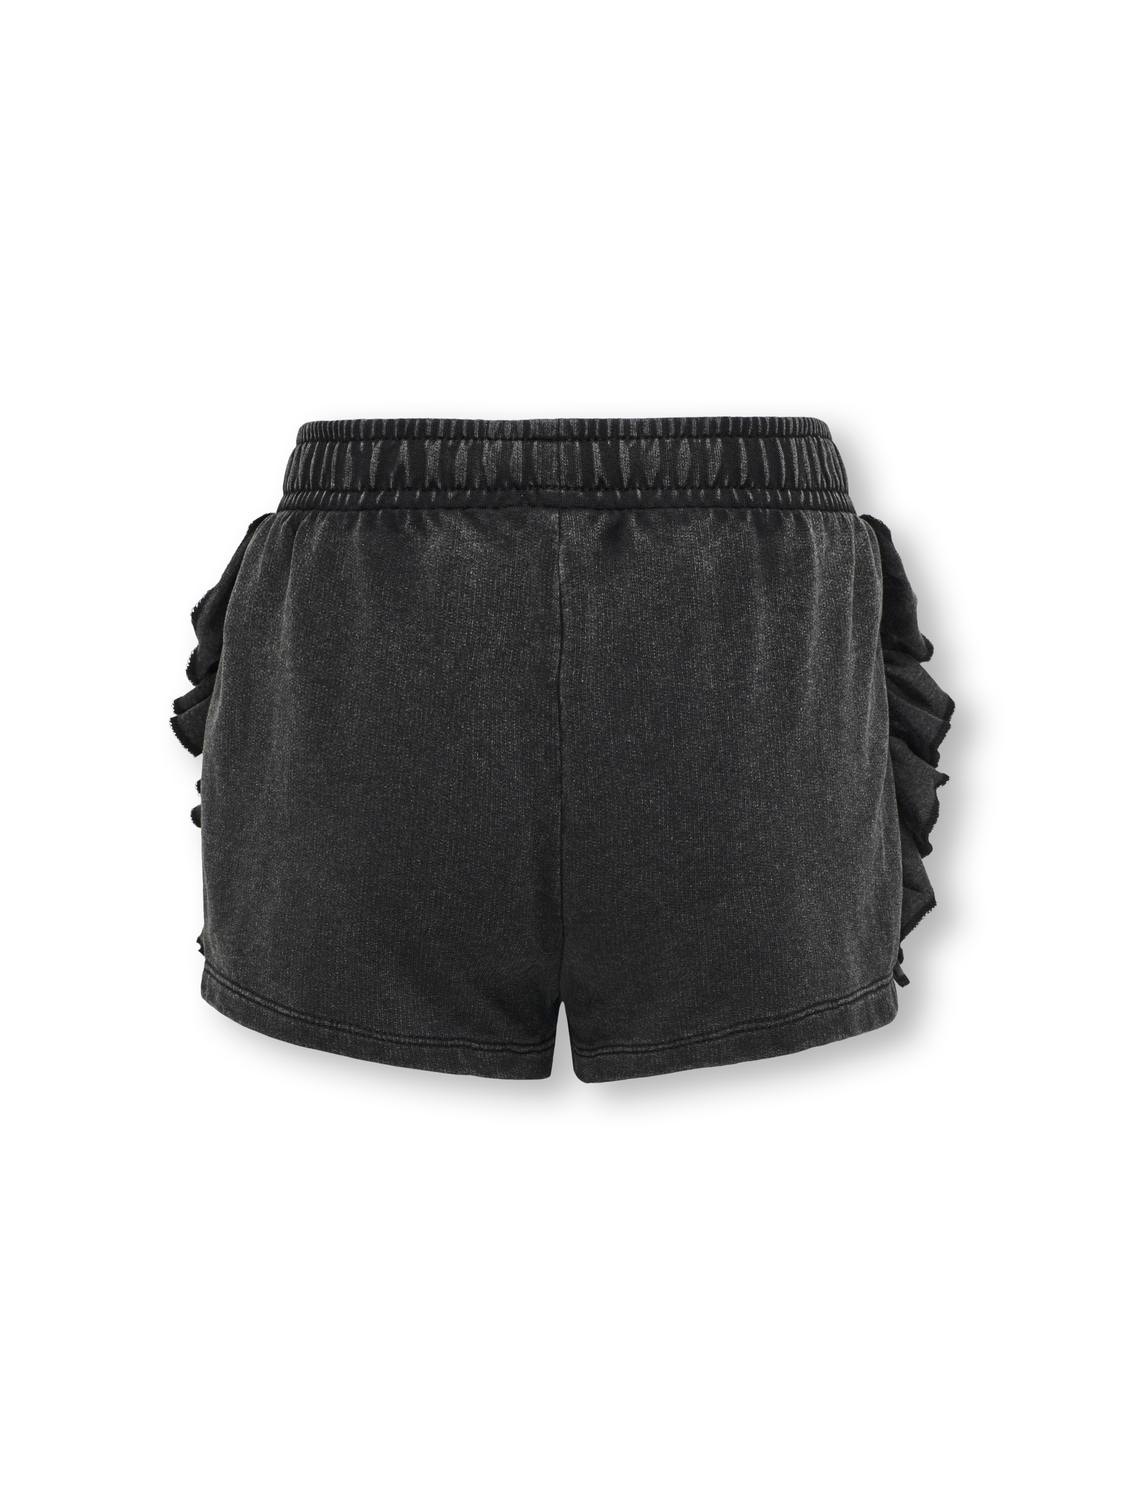 ONLY sweatshorts with frills -Black - 15320278